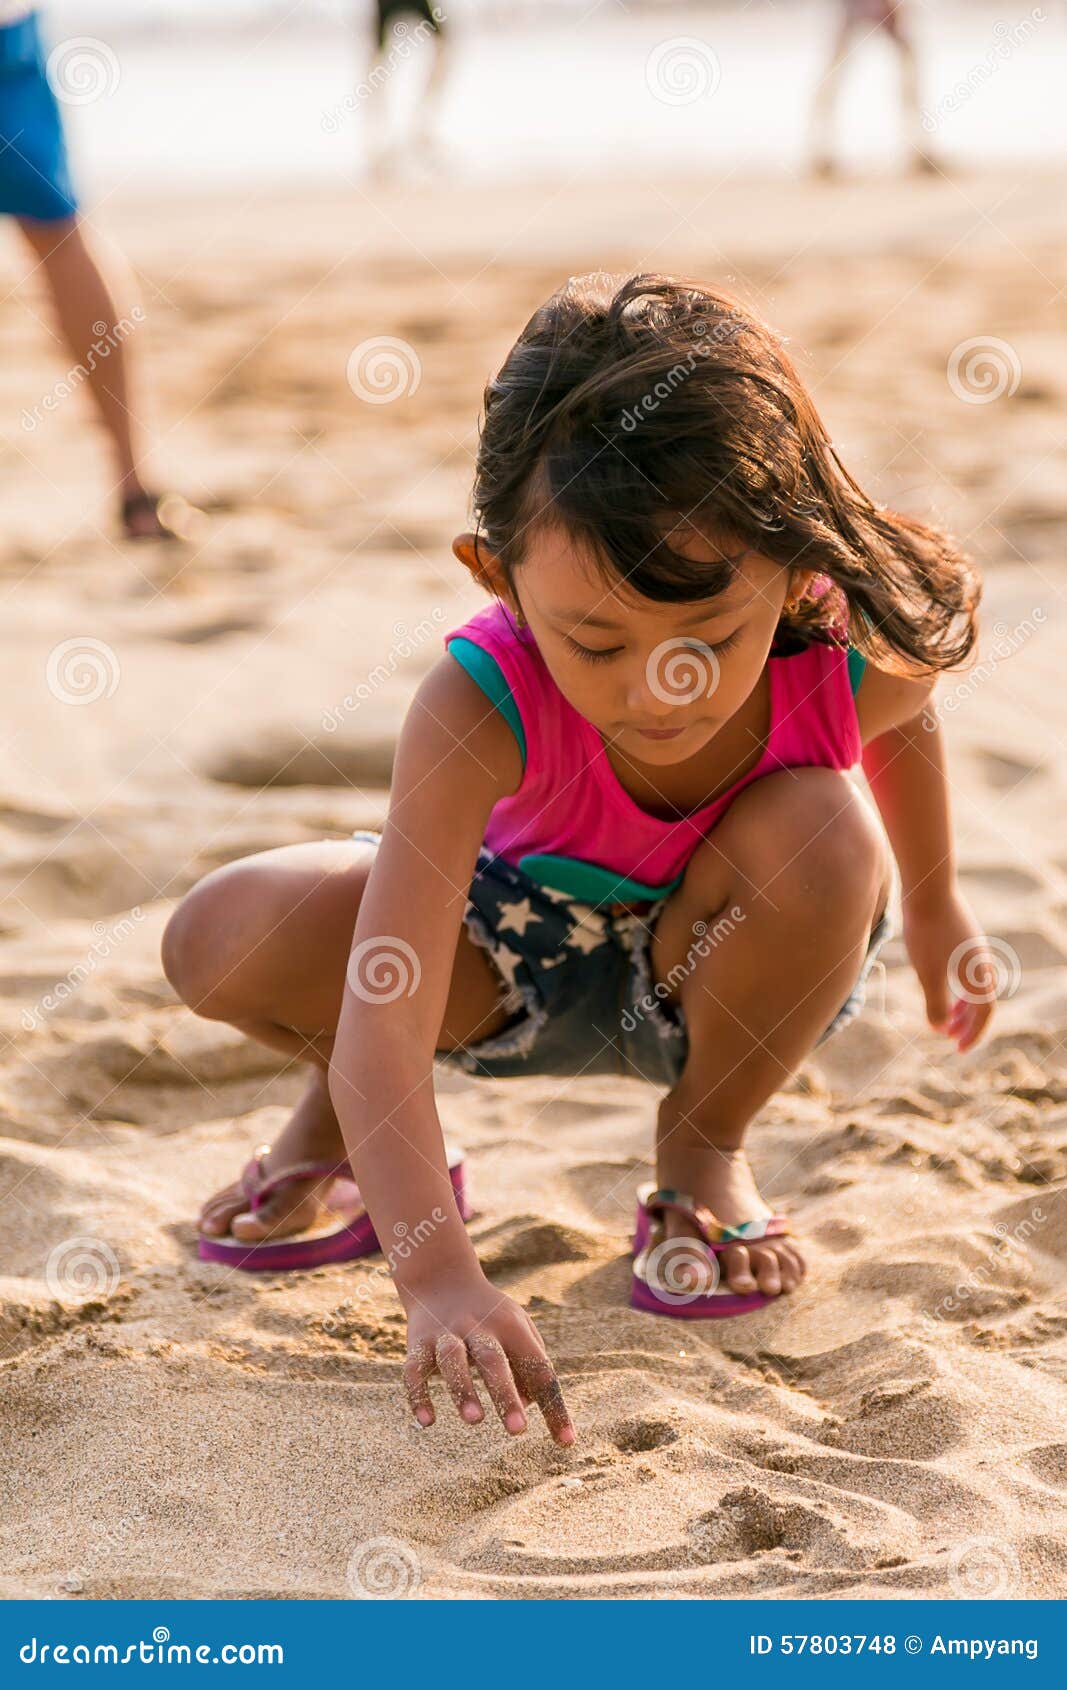 Little Asian Girl Playing On Sunny Beach On A Summer Day Stock Photo - Download Image Now - iStock